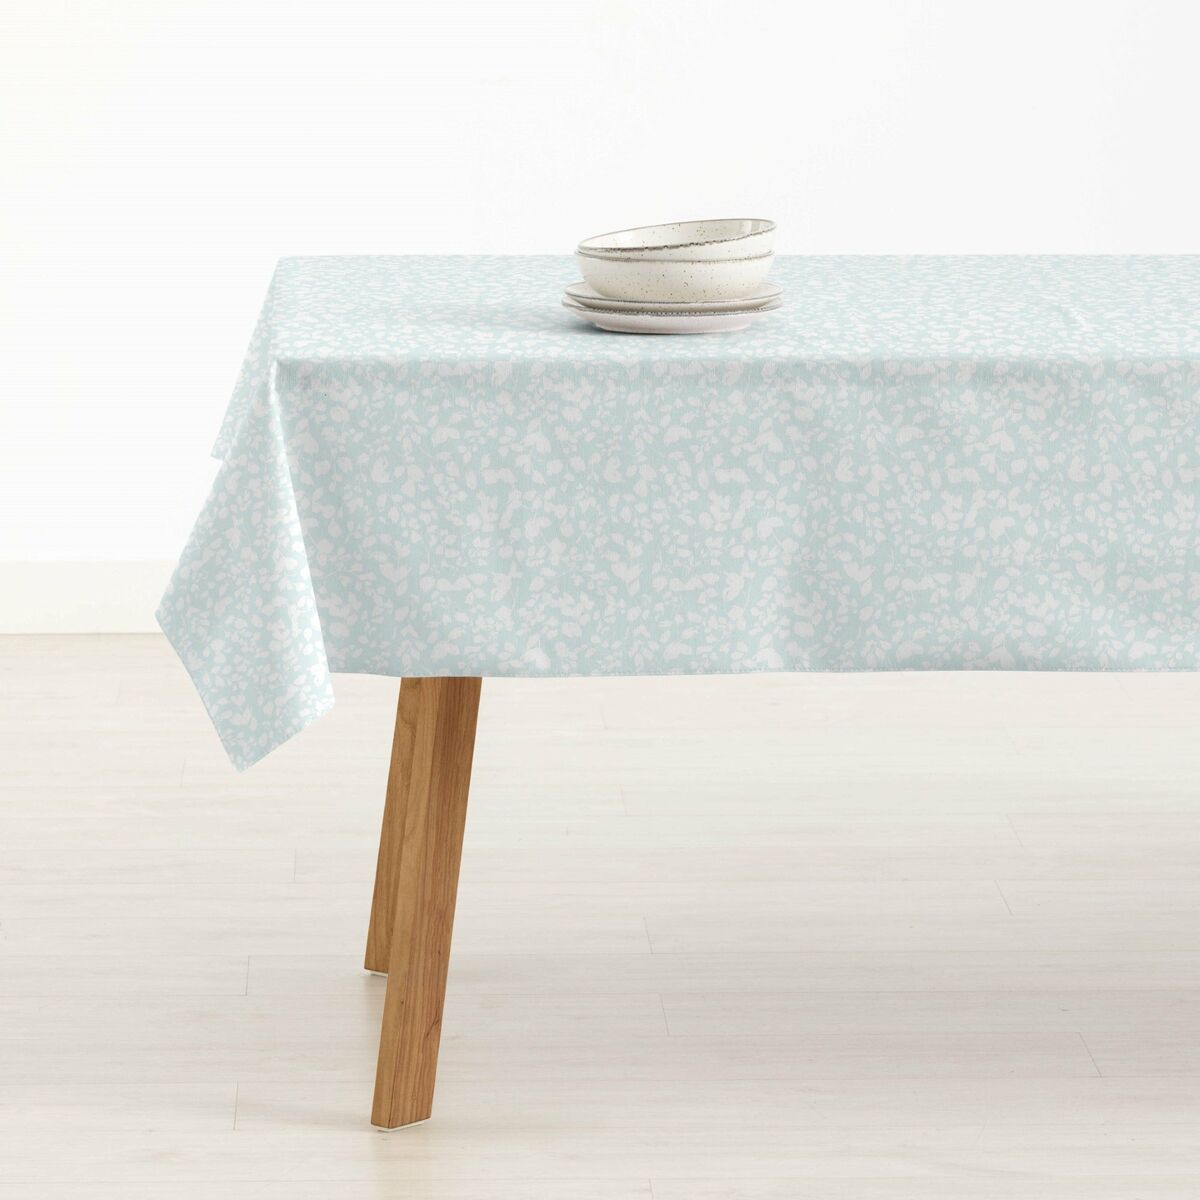 Stain-proof tablecloth Belum 0120-379 100 x 140 cm